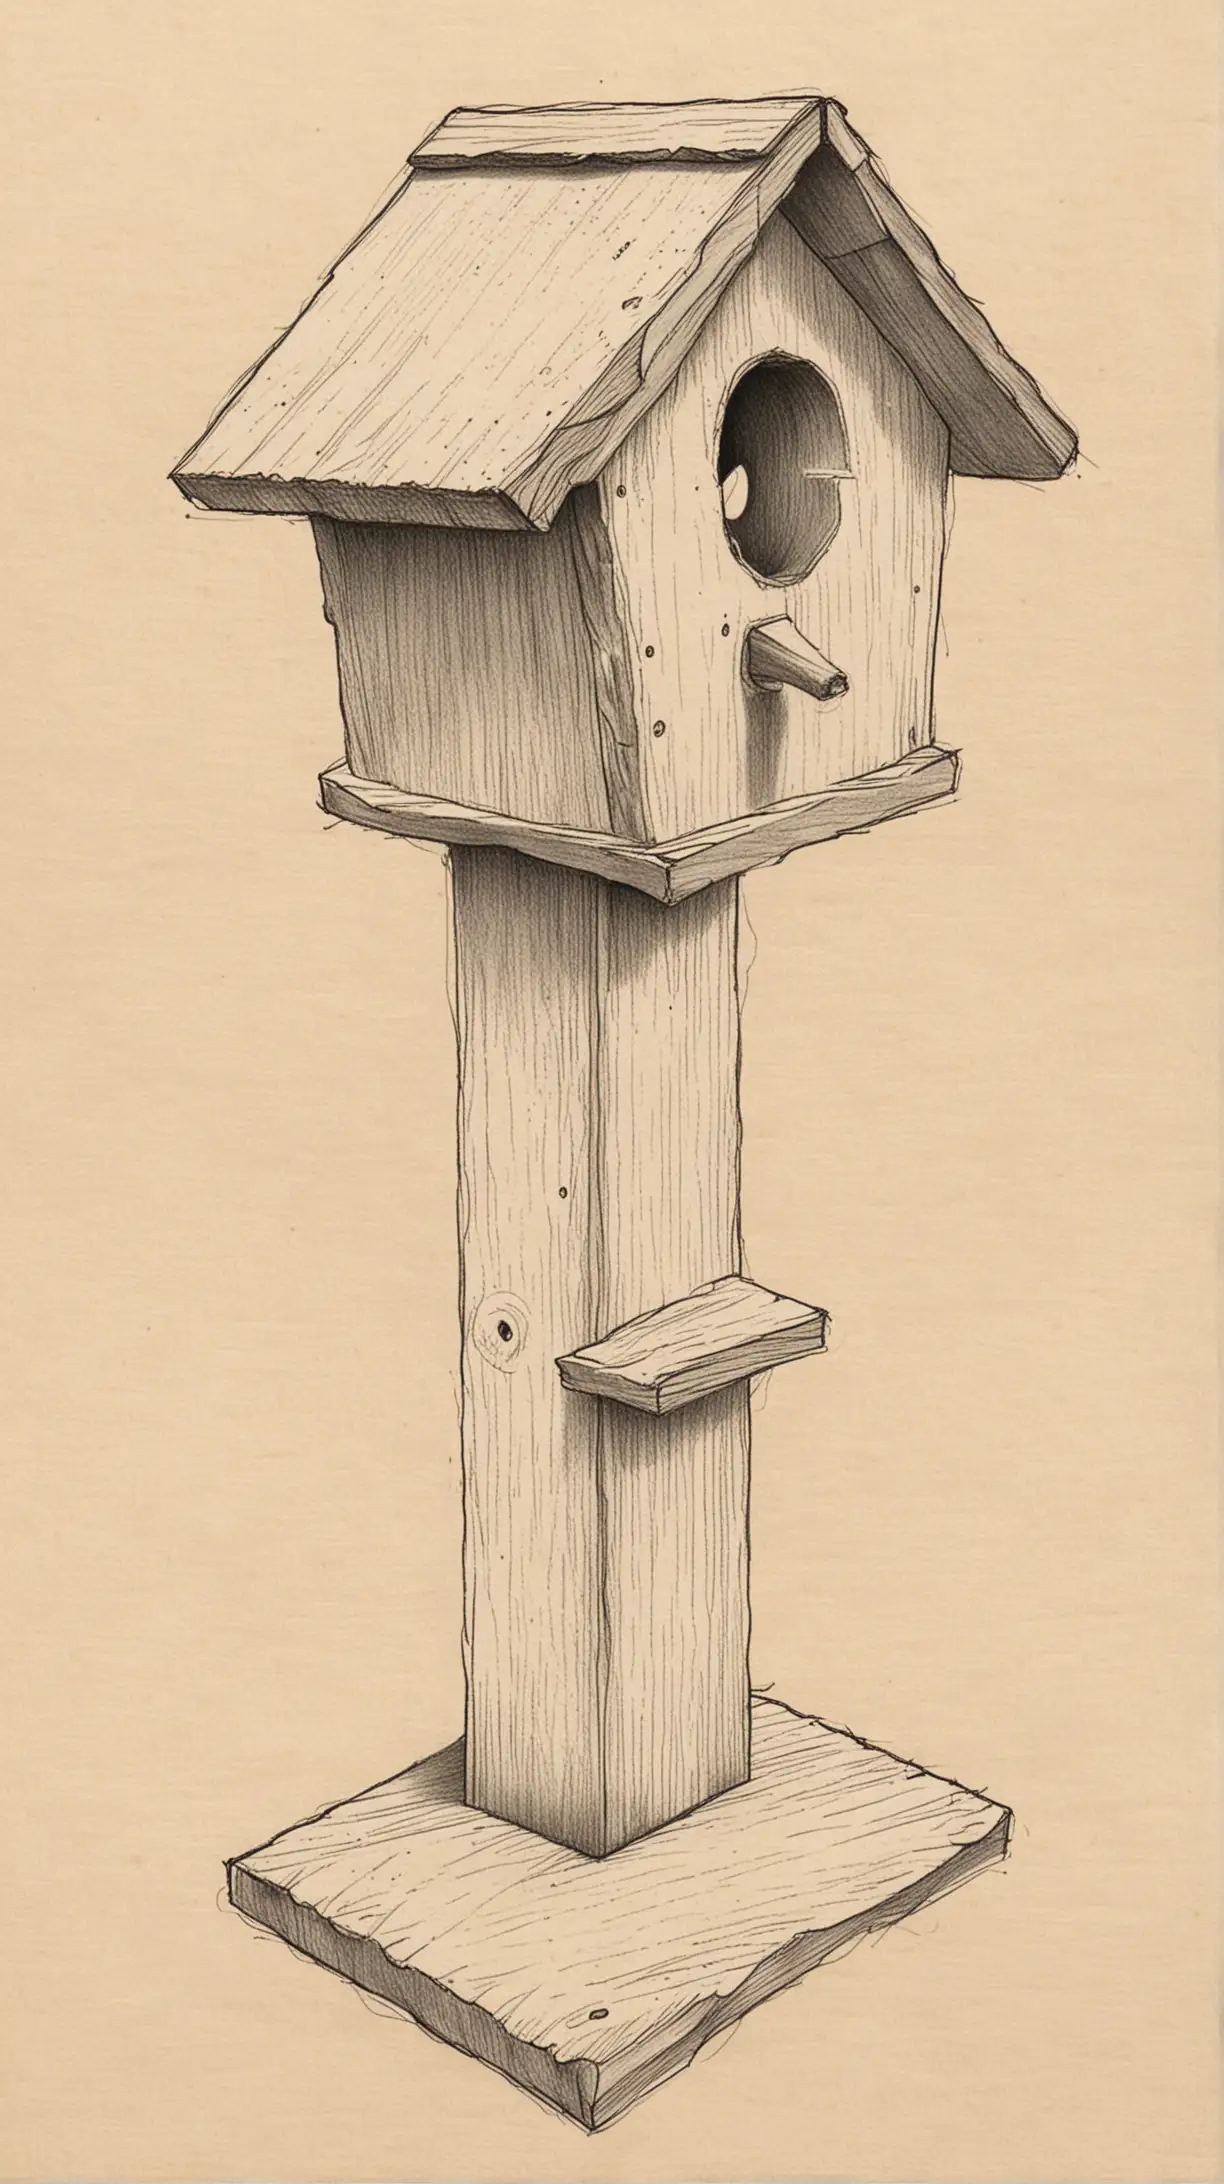 sketched how to build a birdhouse step by step using perspective